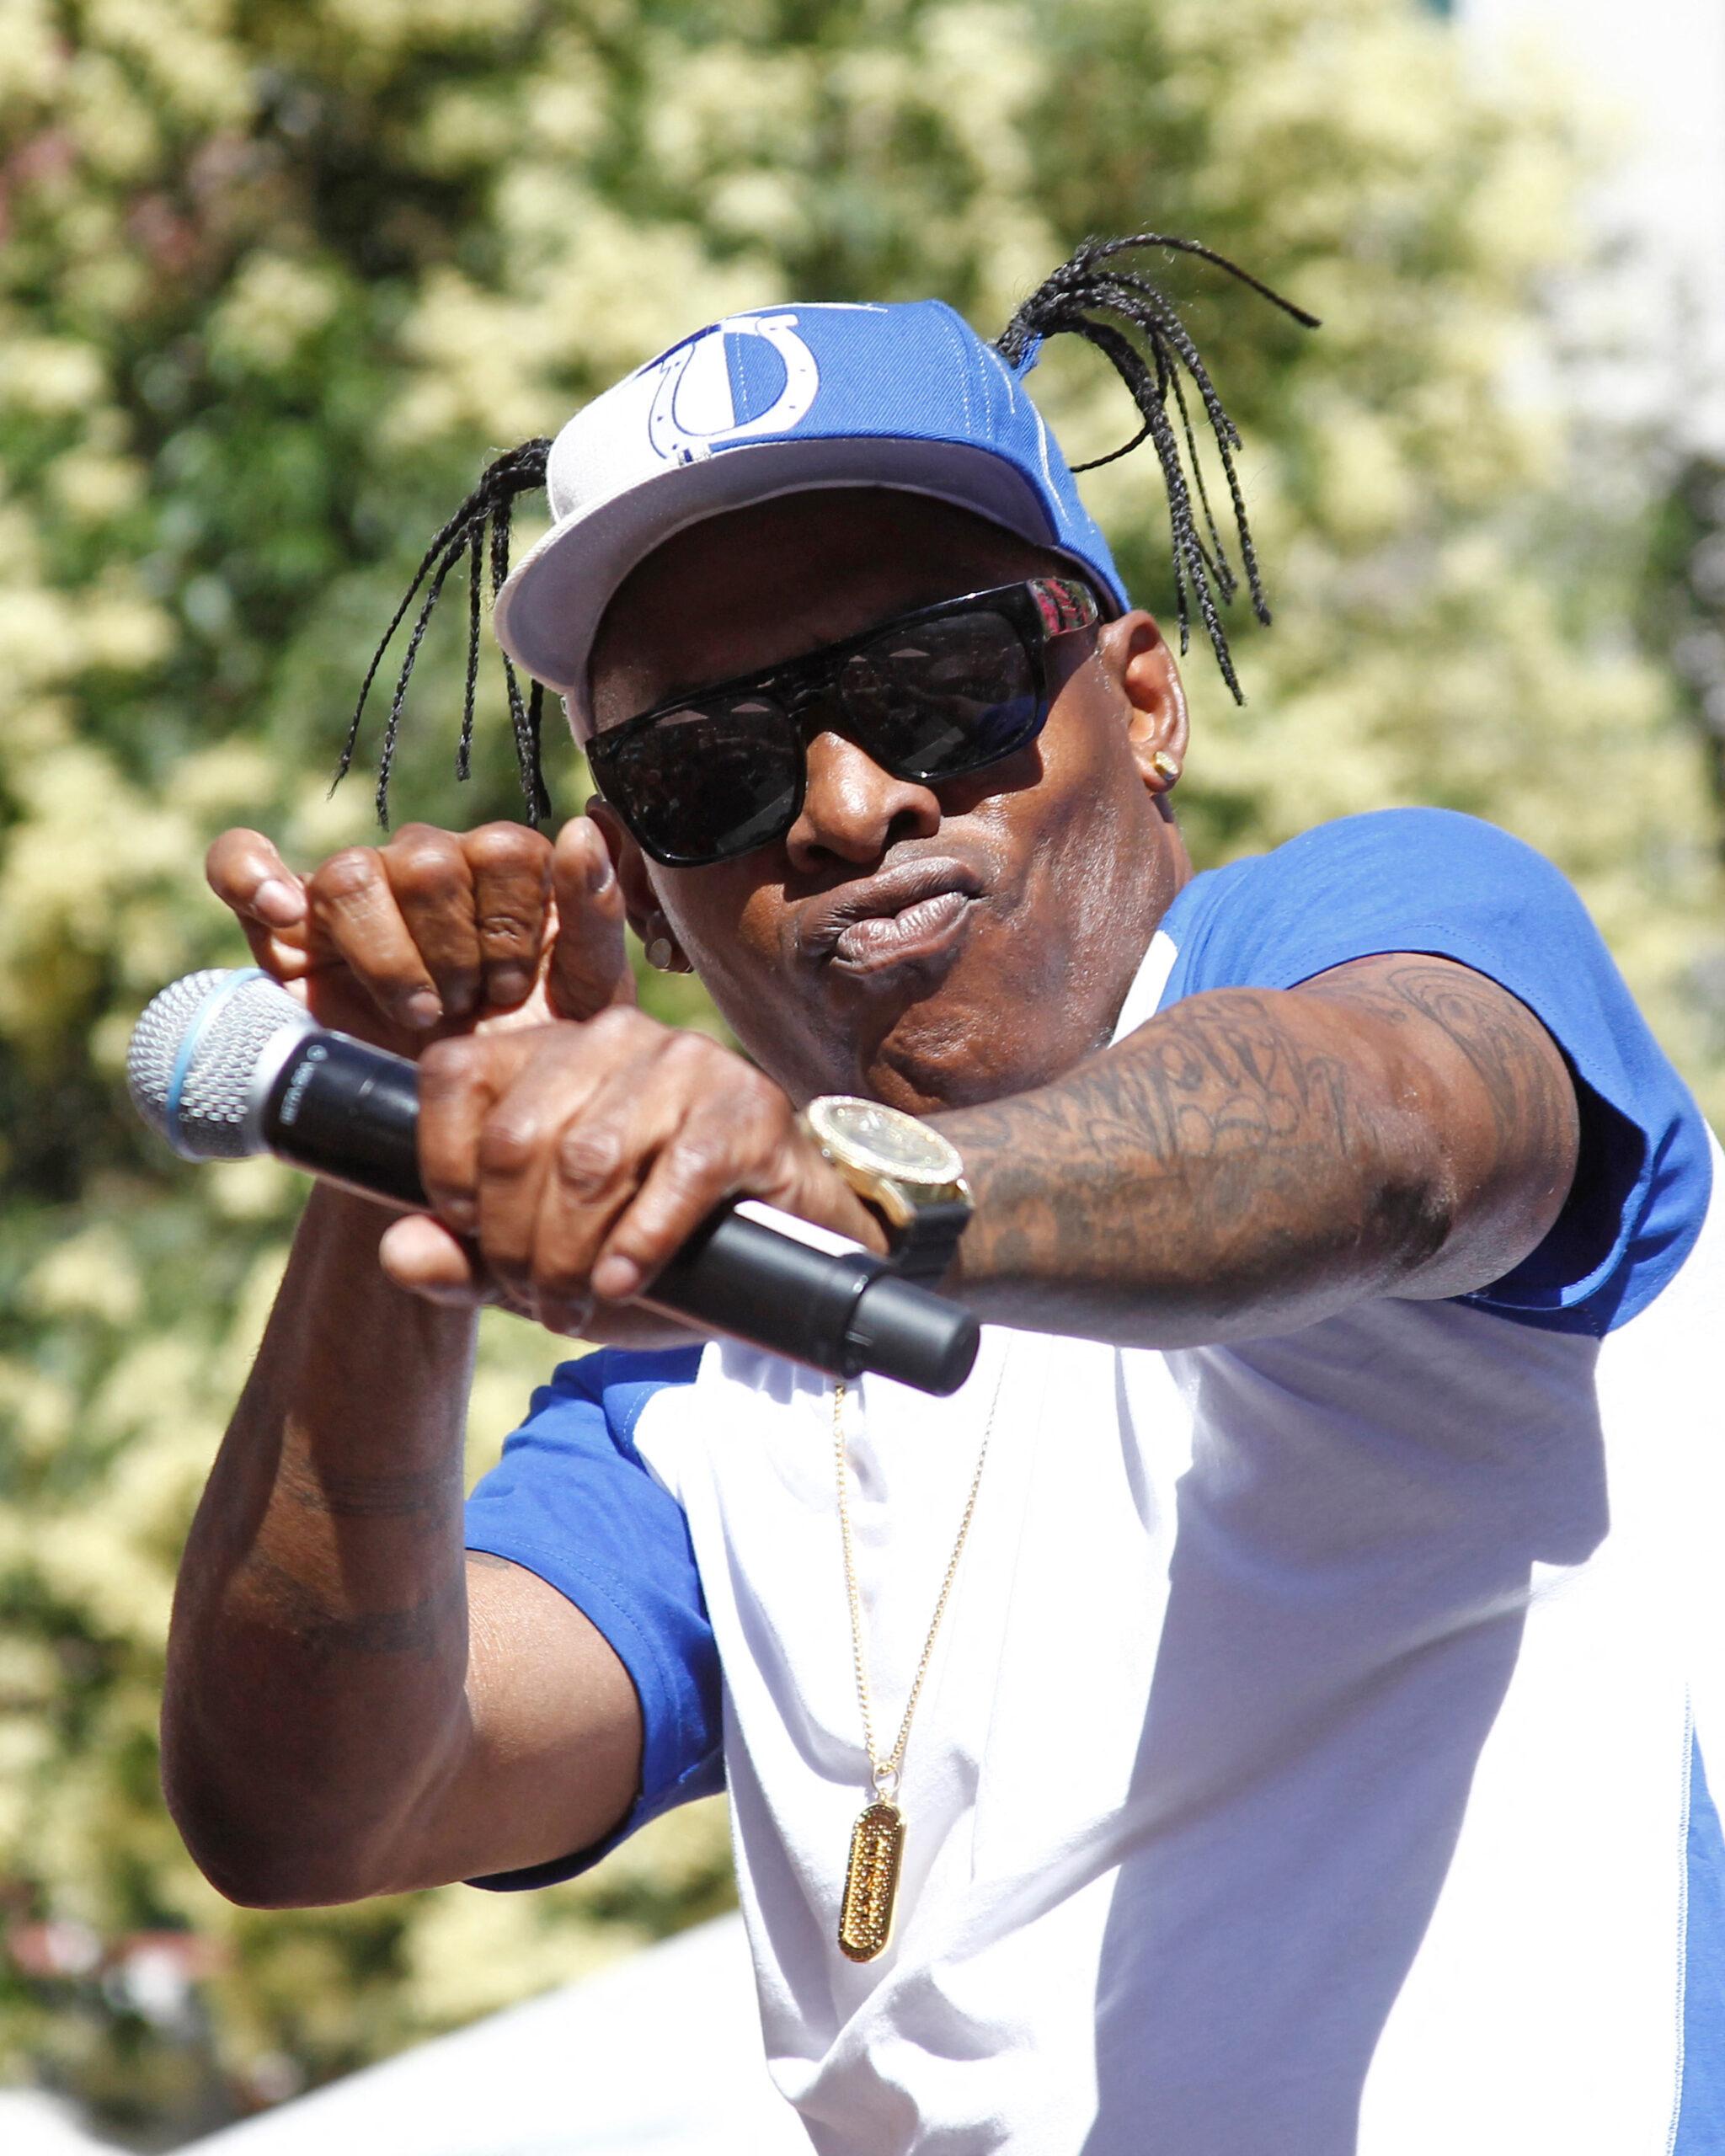 Rapper Coolio's Cause Of Death 'Deferred' By L.A. County Coroner's Office